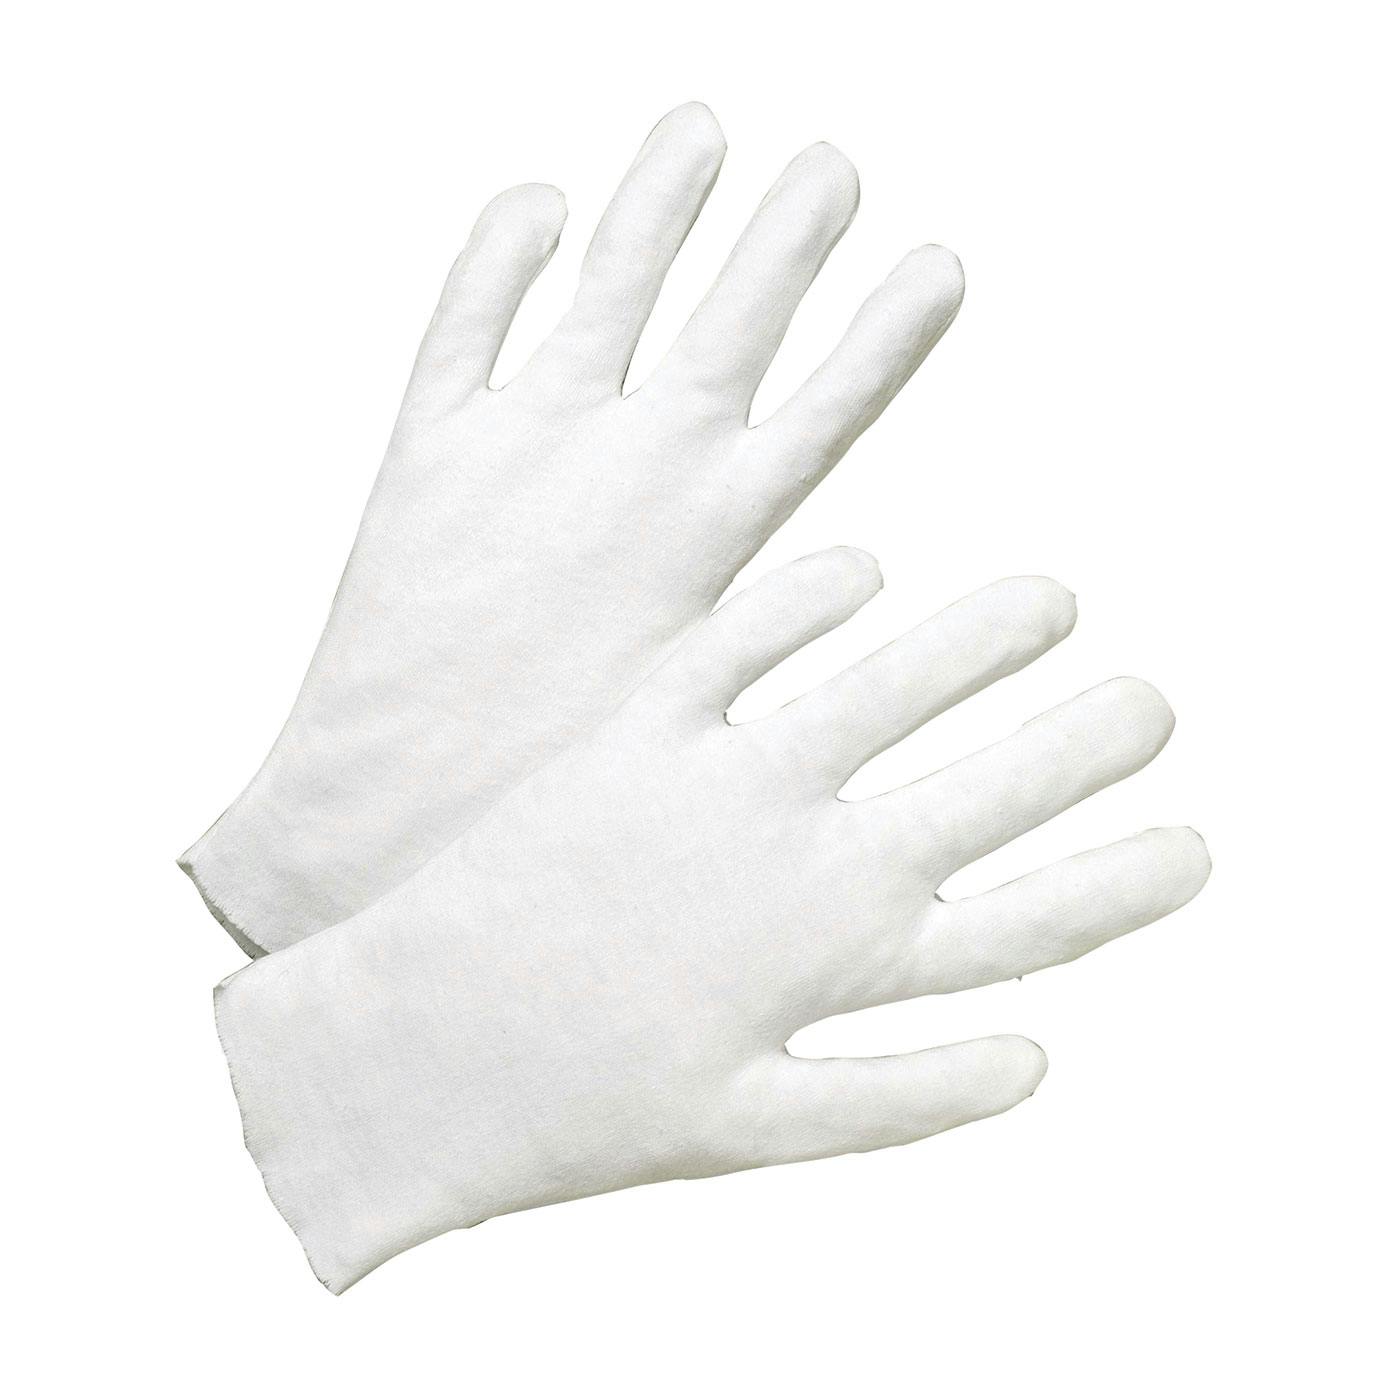 PIP® Heavy Weight Cotton Lisle Inspection Glove with Unhemmed Cuff (805)